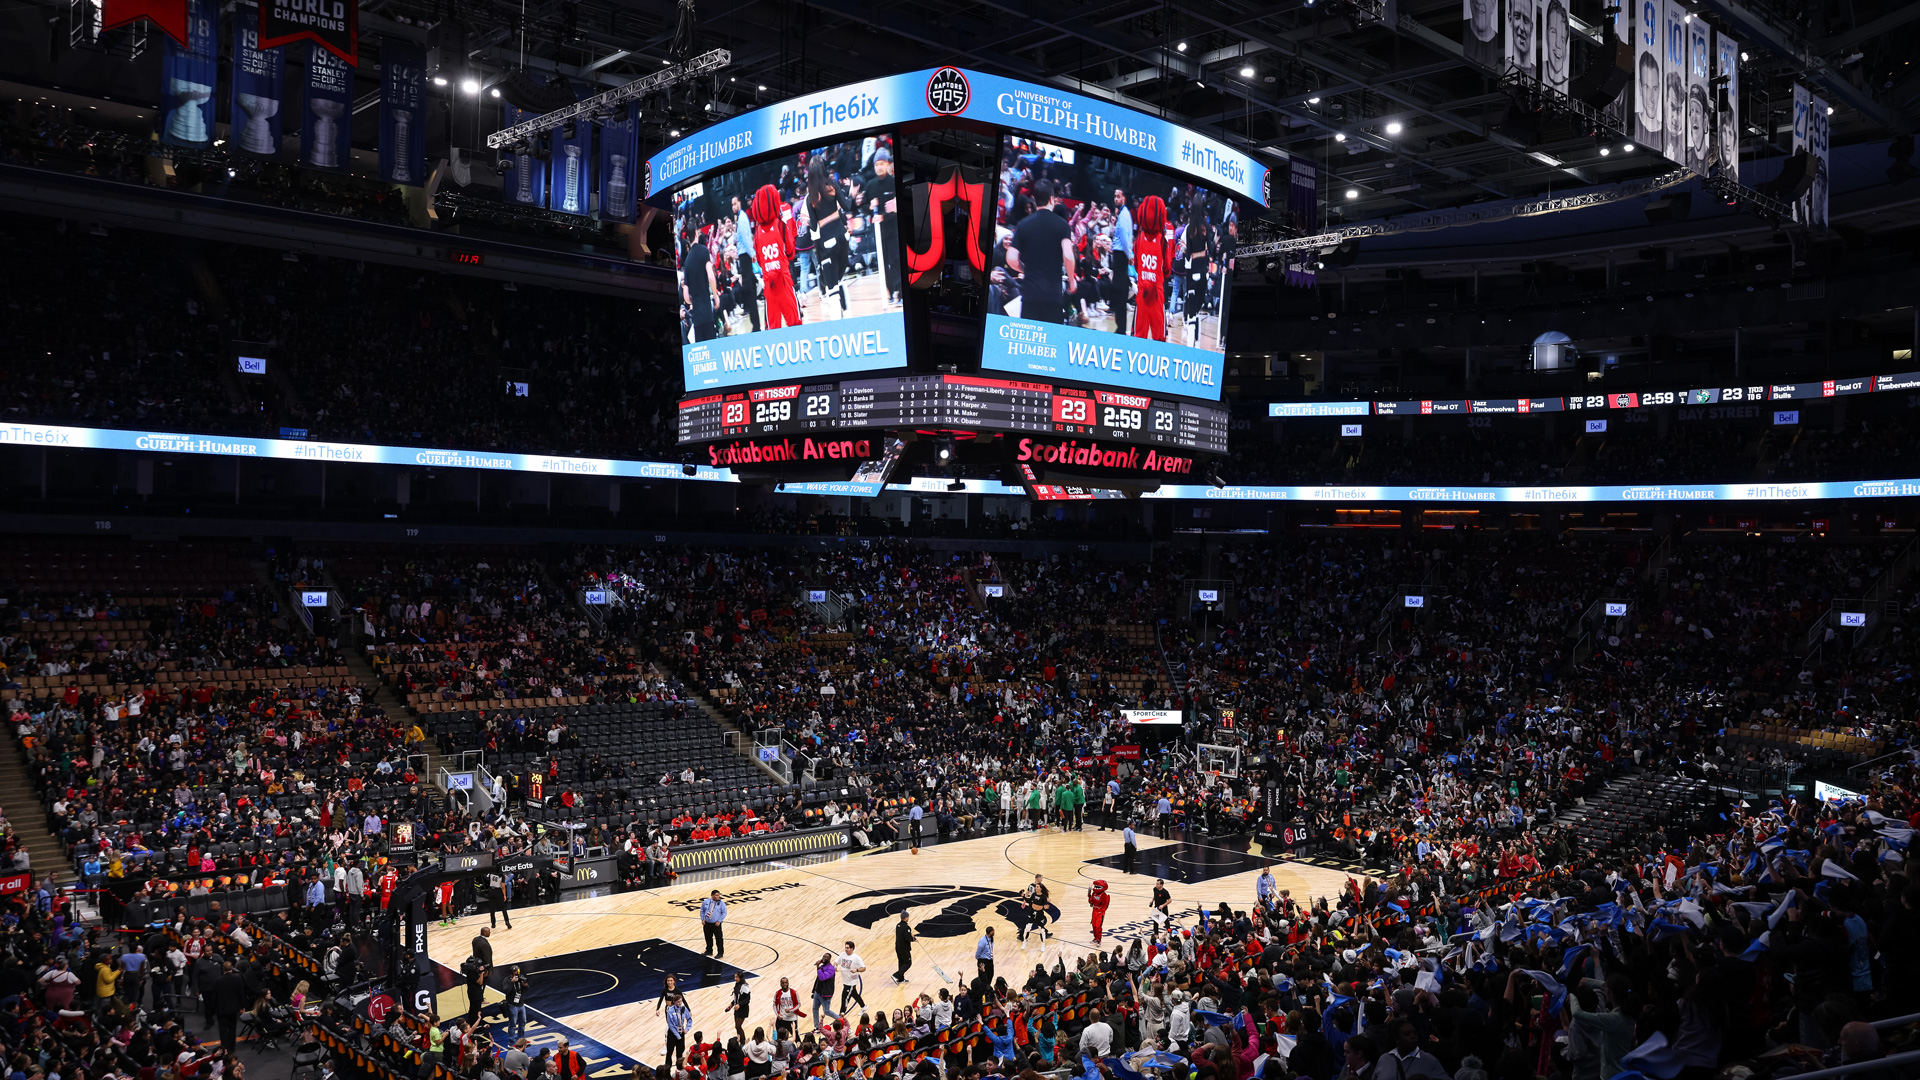 Inside Scotiabank Arena with University of Guelph-Humber branding on the jumbotron